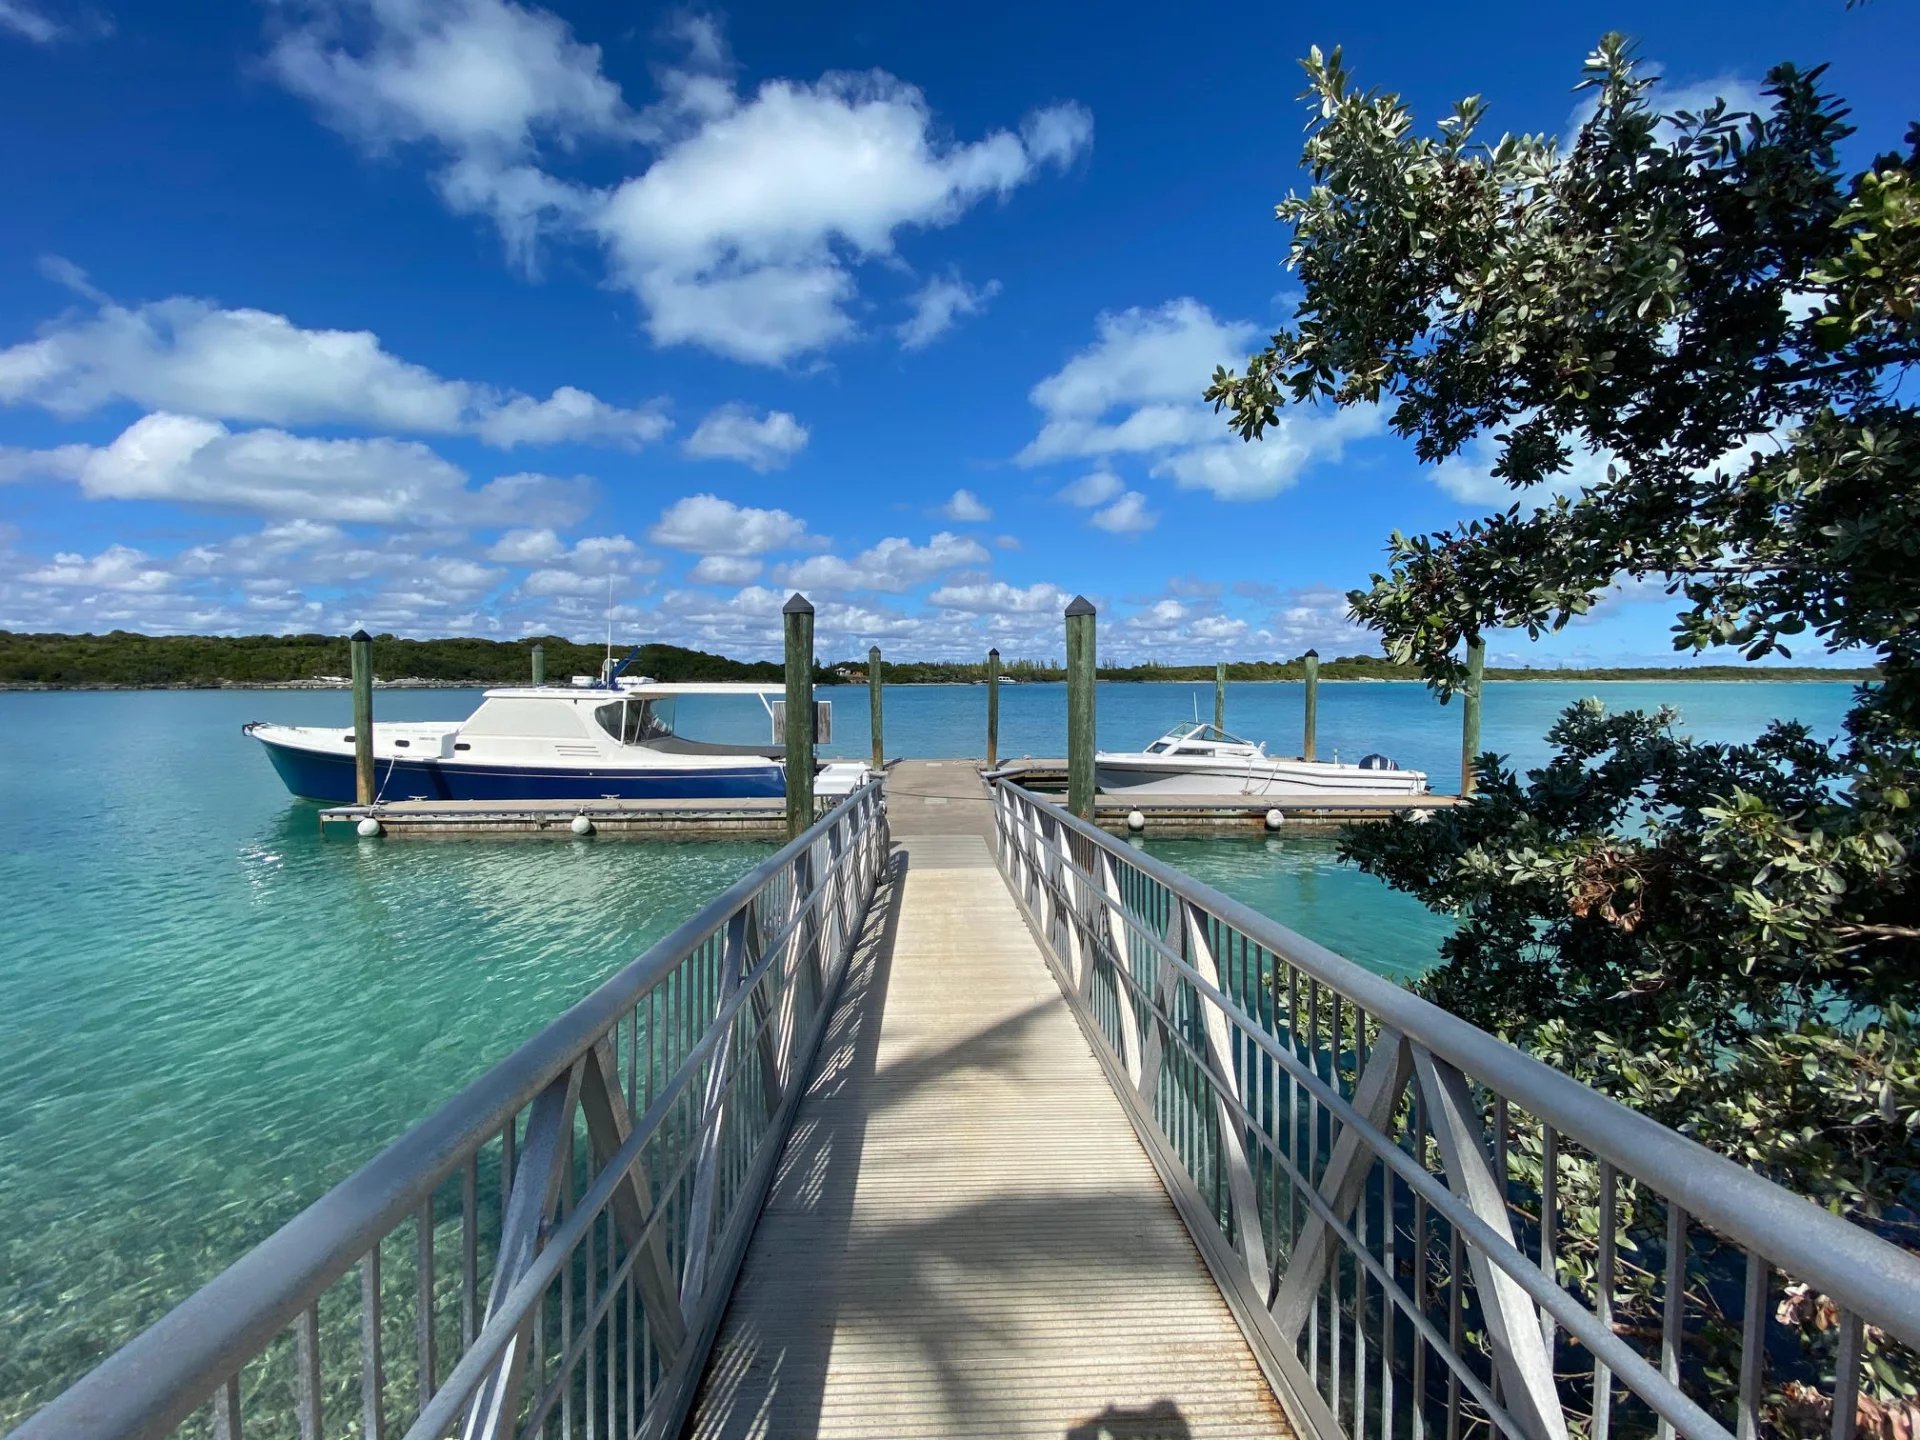 royal island, the perfect private island opportunity - mls 51444 image28